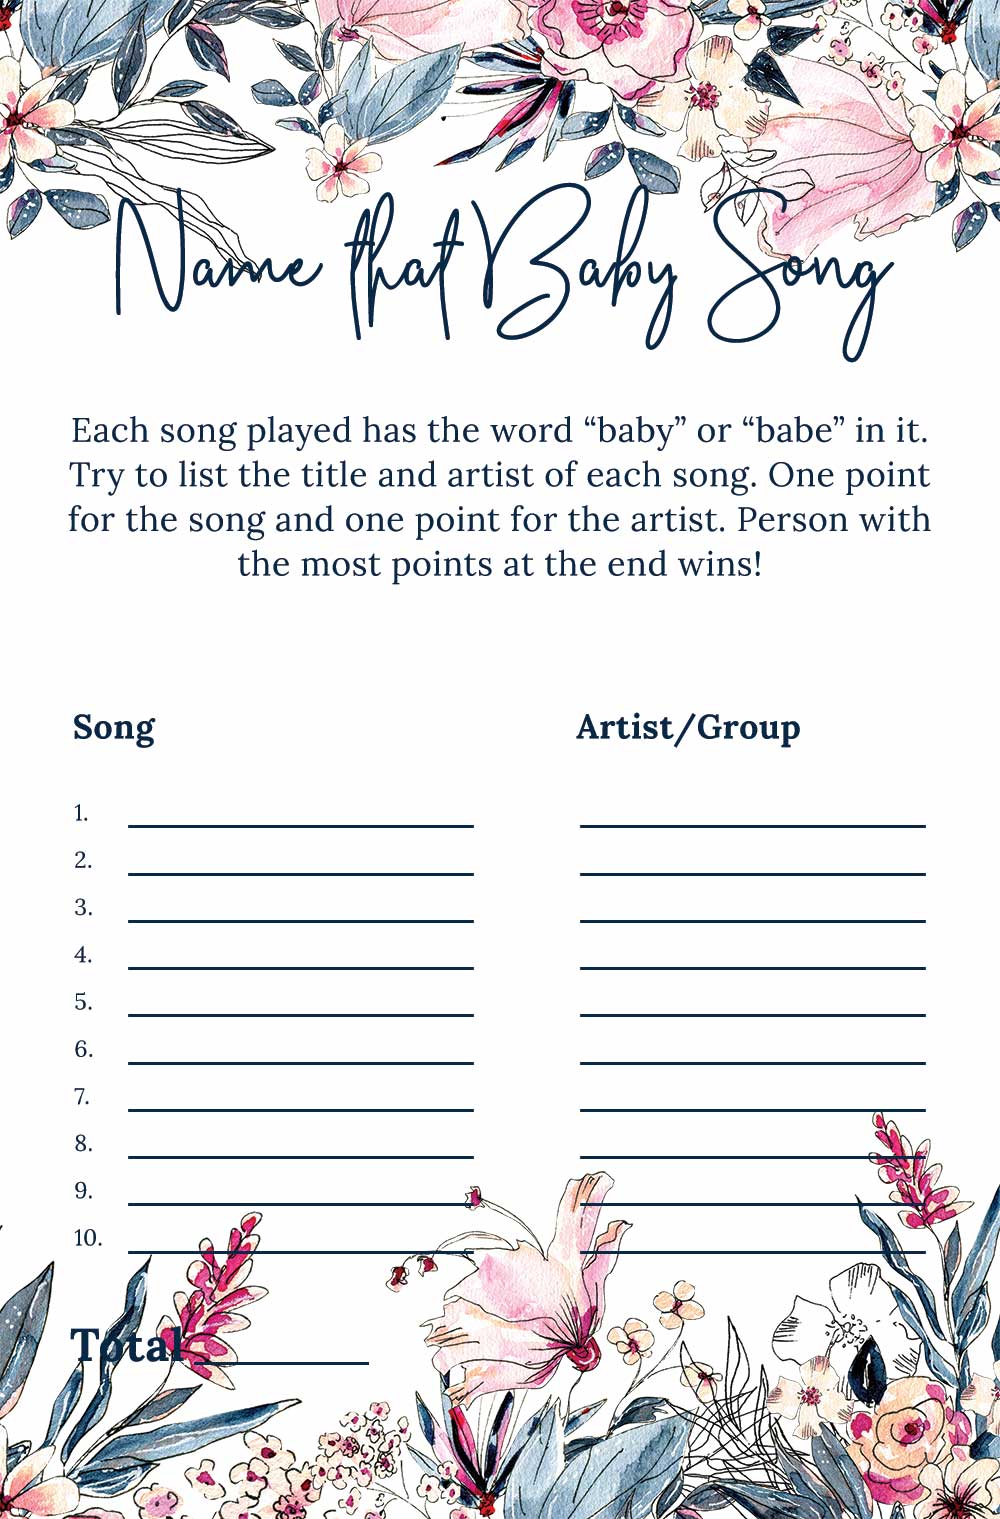 Name that baby song game - Swan theme